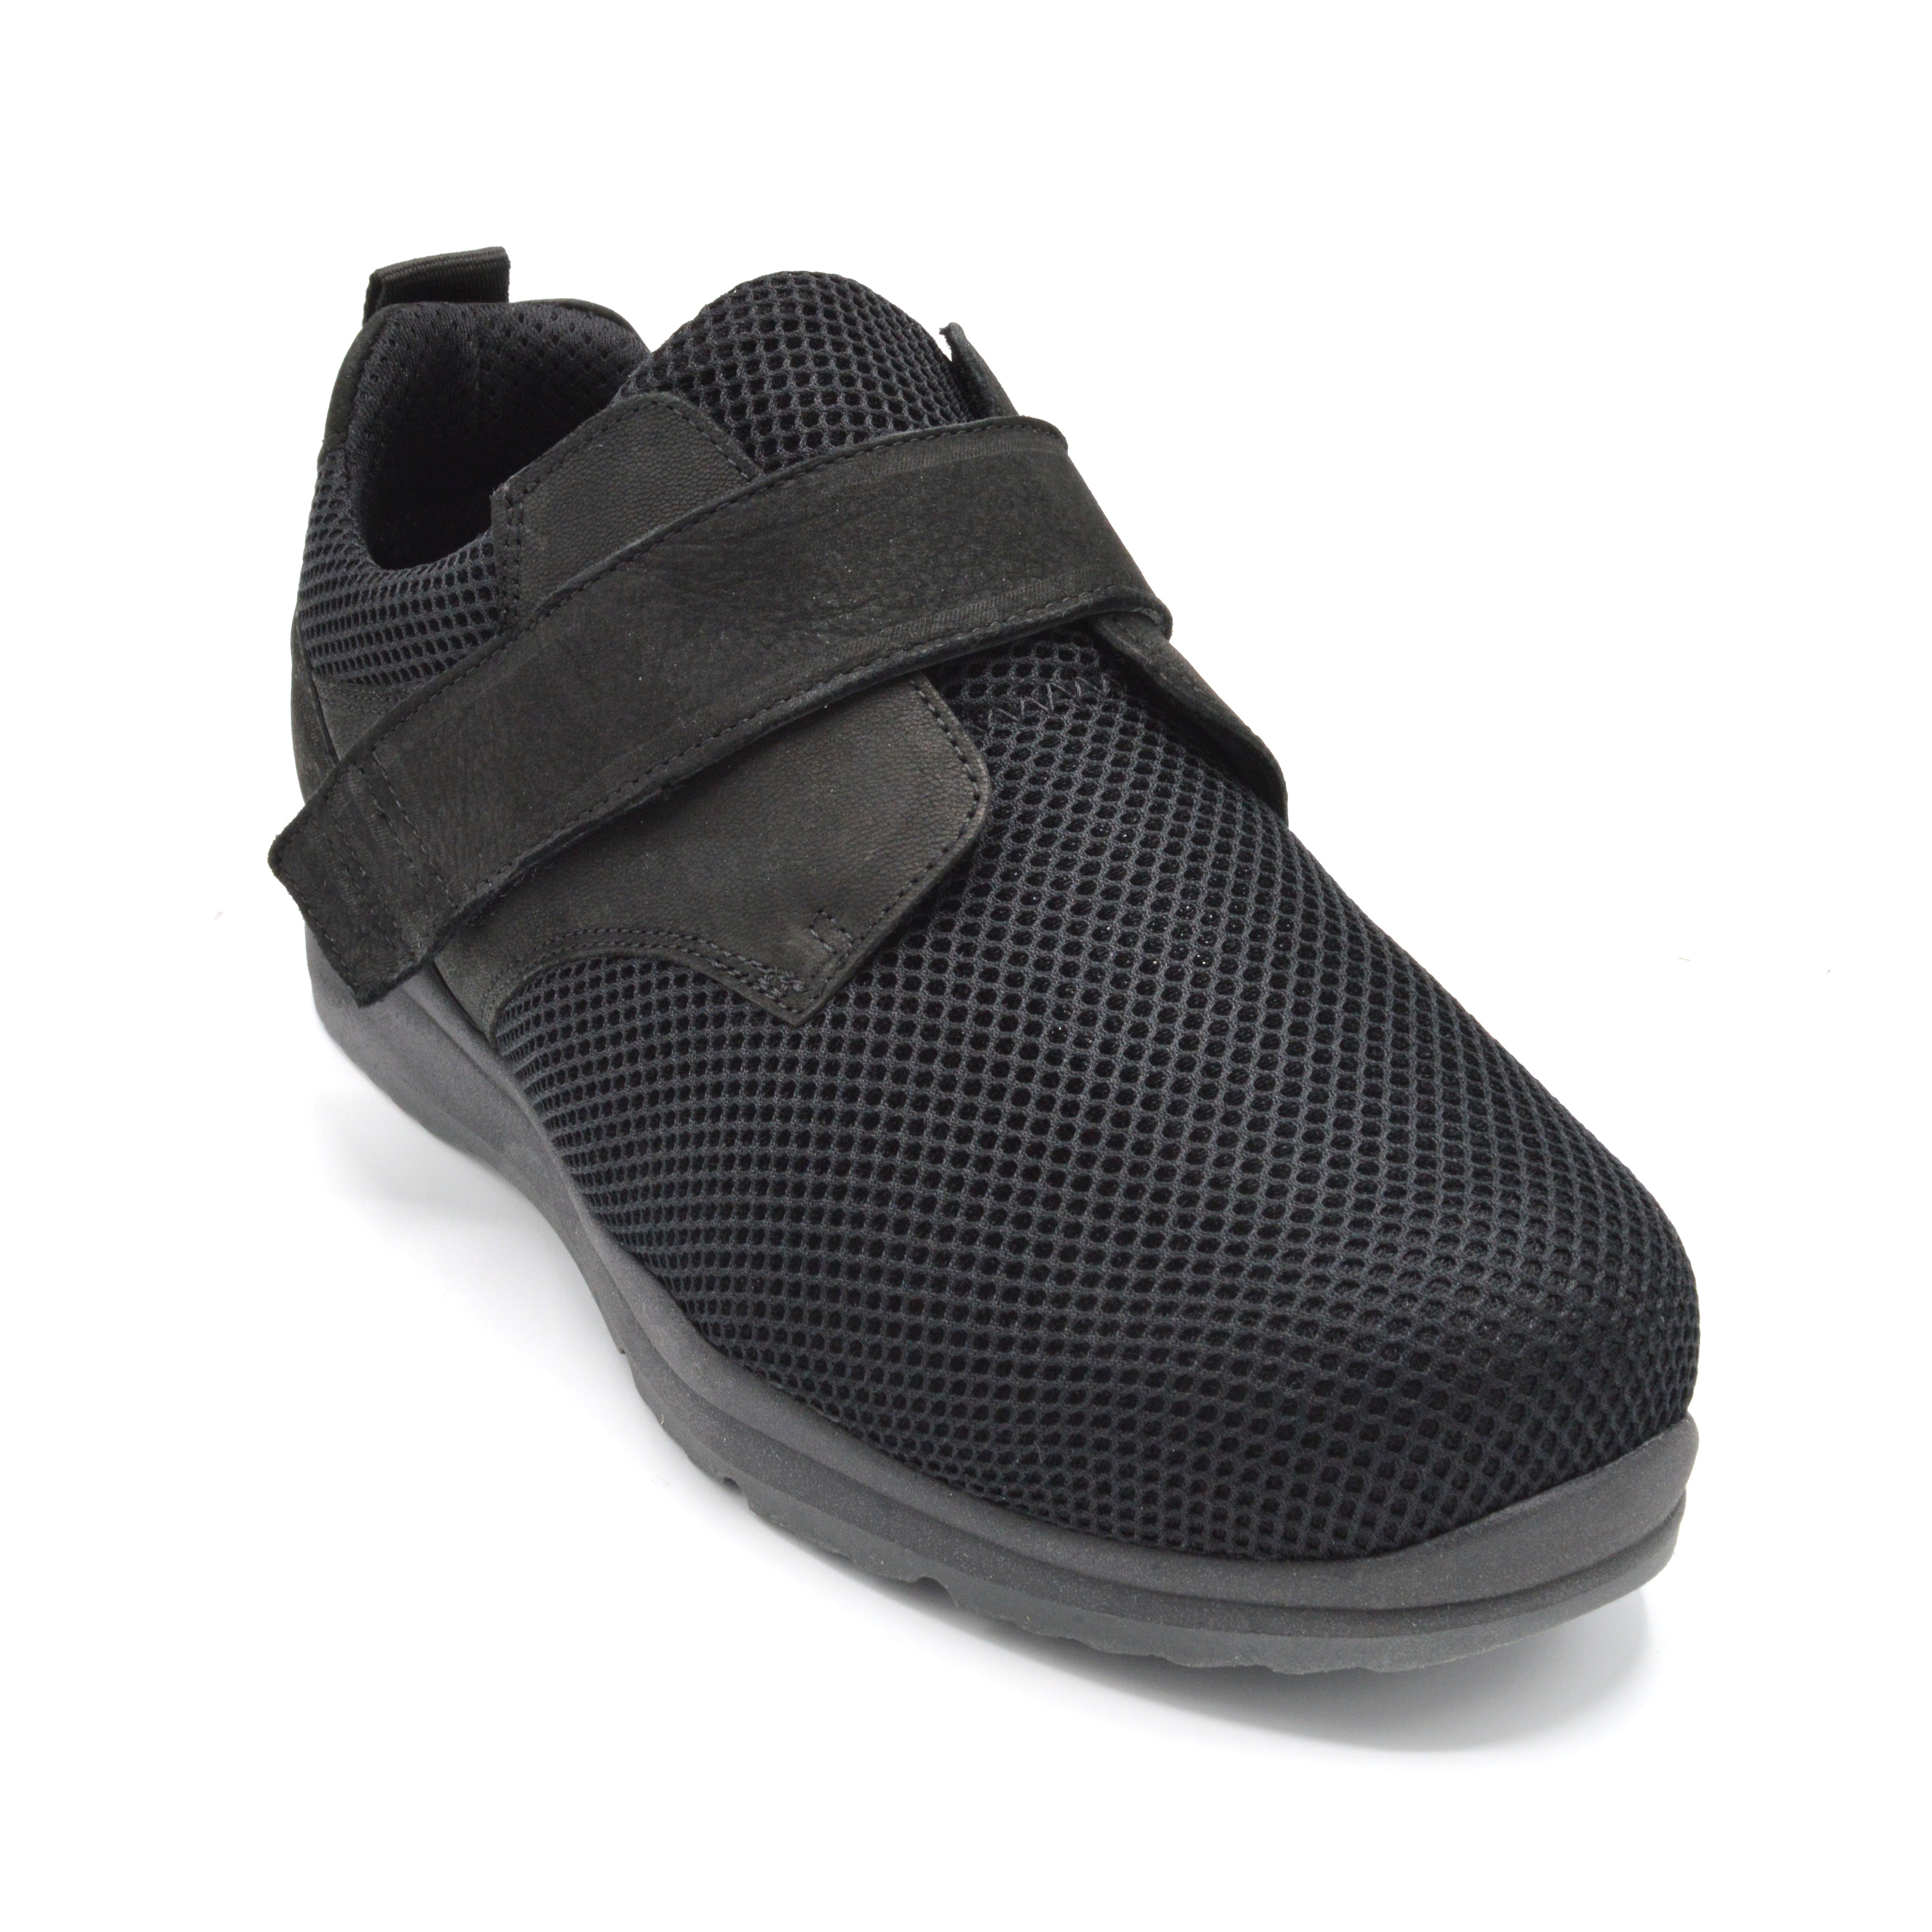 Extra Wide Black Velcro Shoe For Bunions